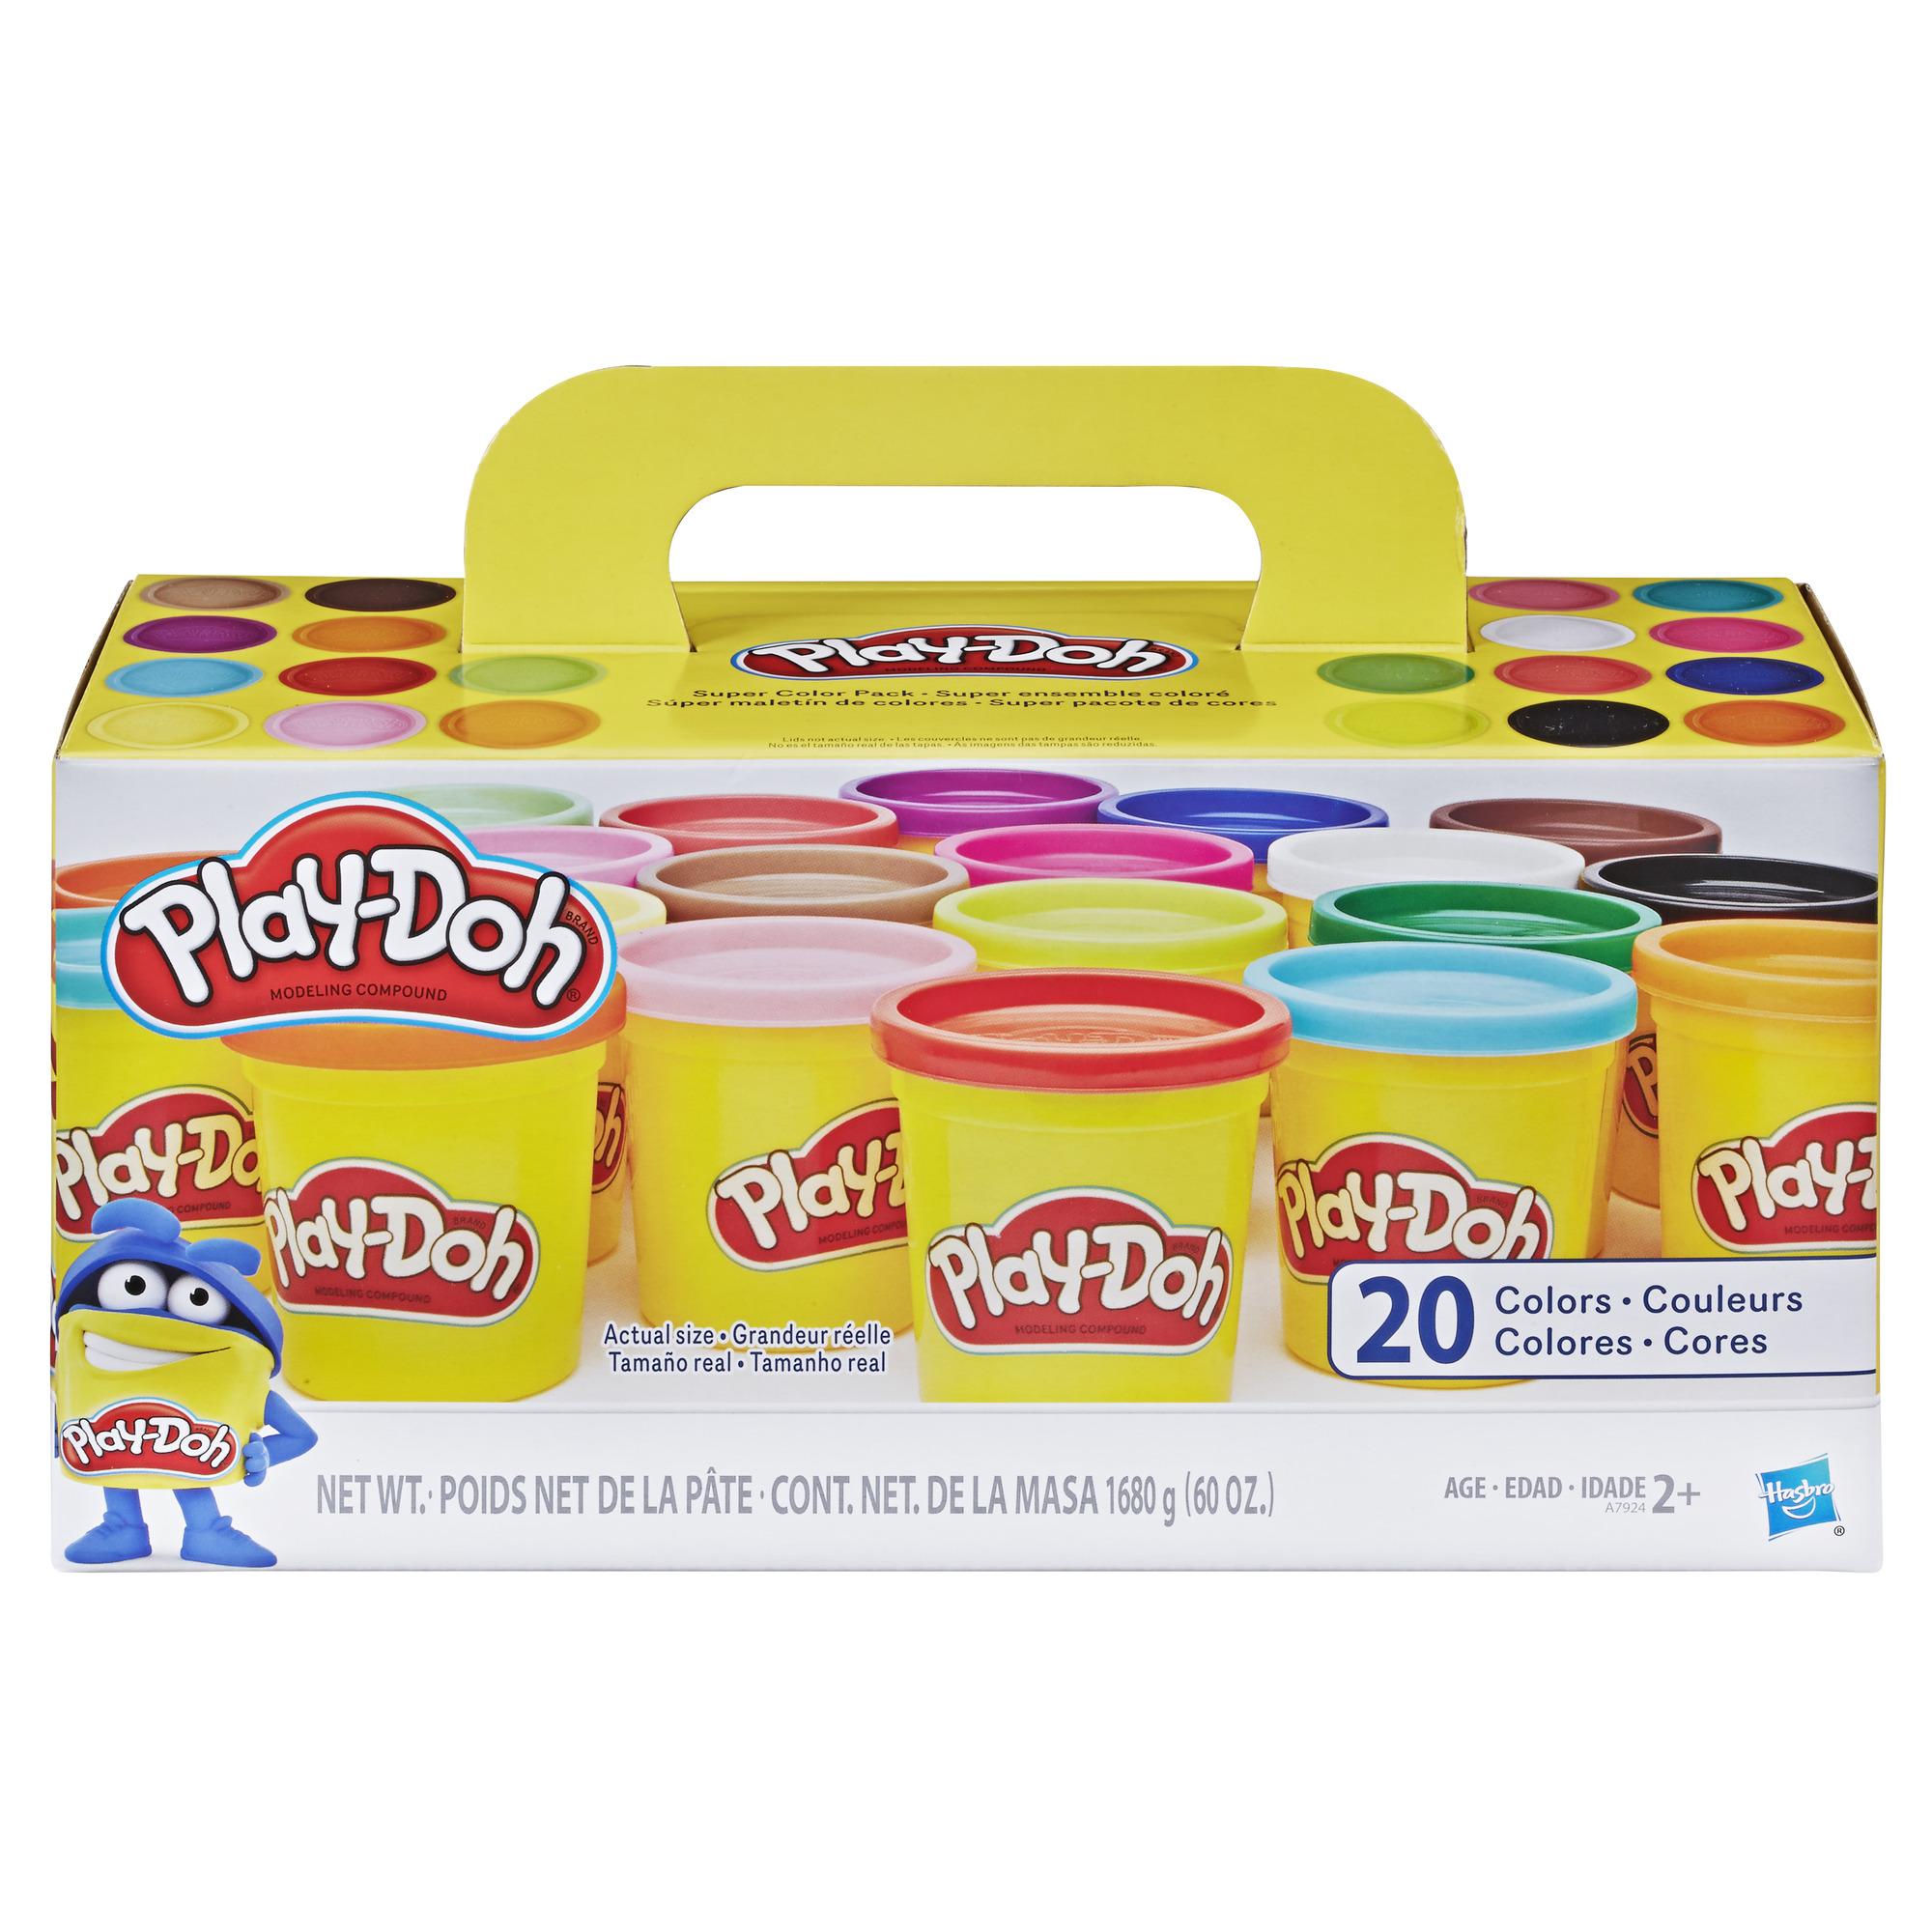 20 Play-Doh Super Color Pack for $5.94